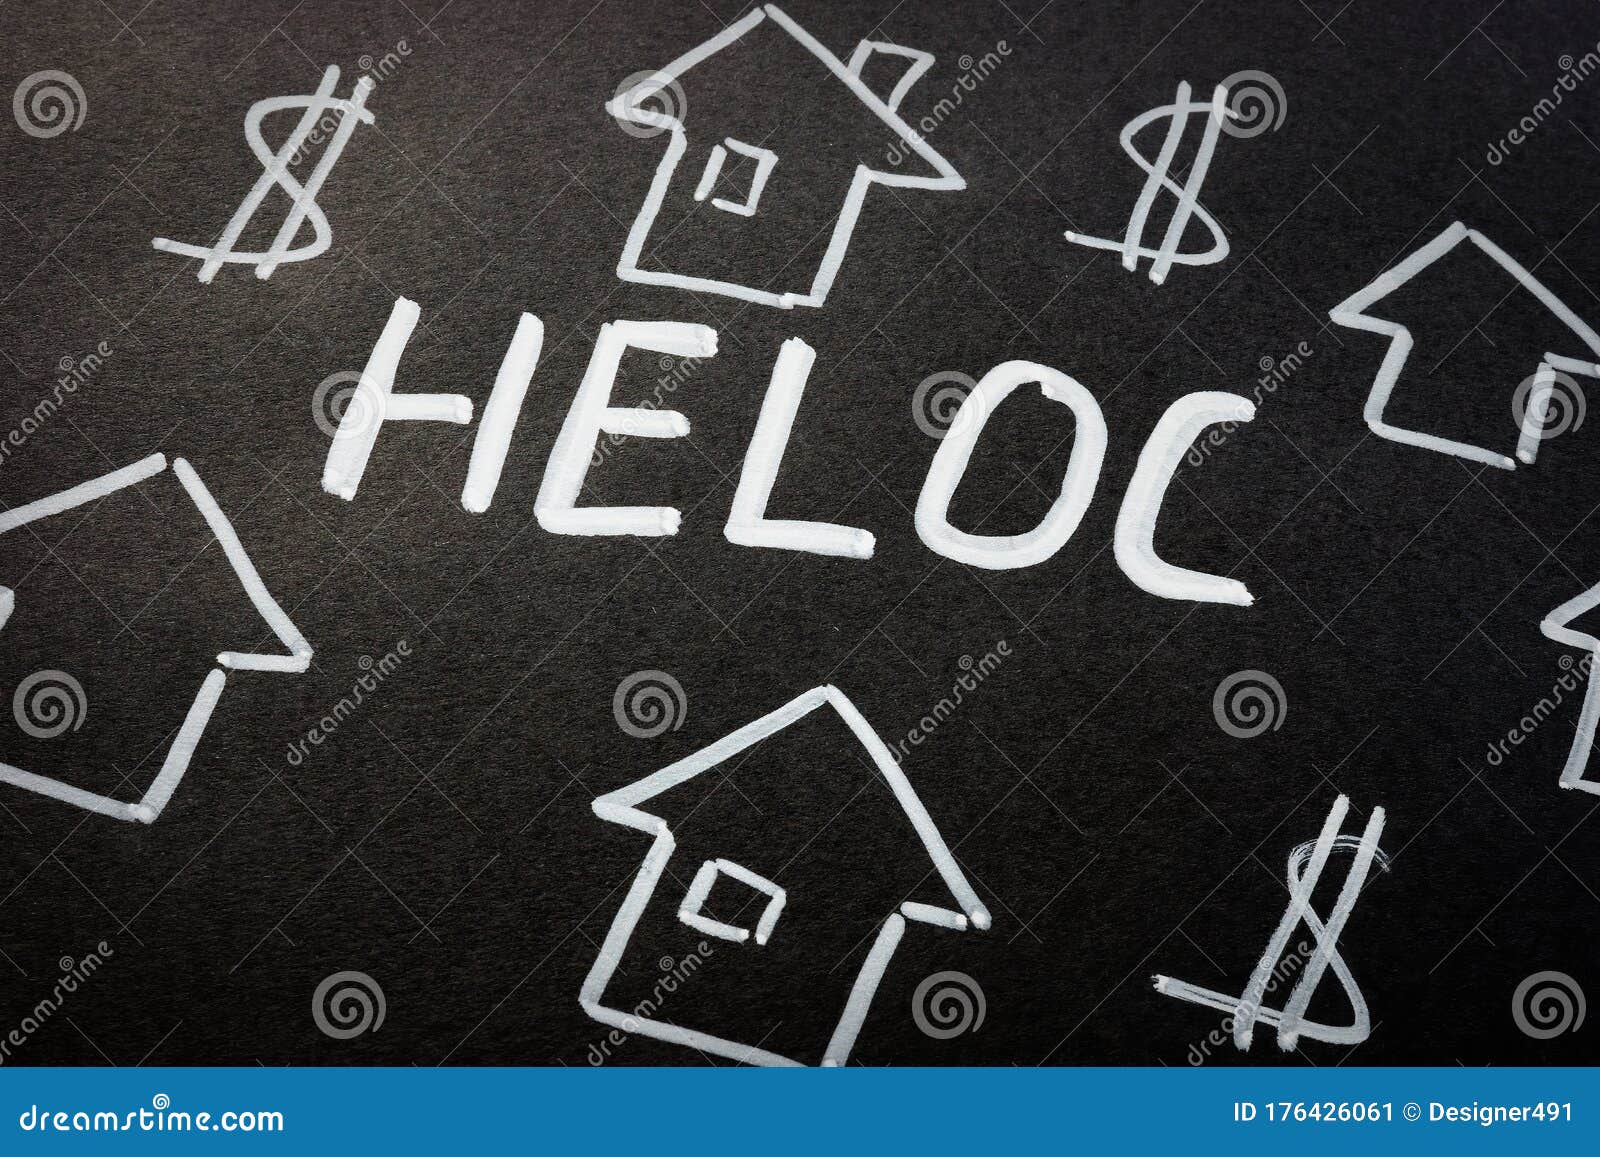 heloc home equity line of credit loan and homes on the black sheet